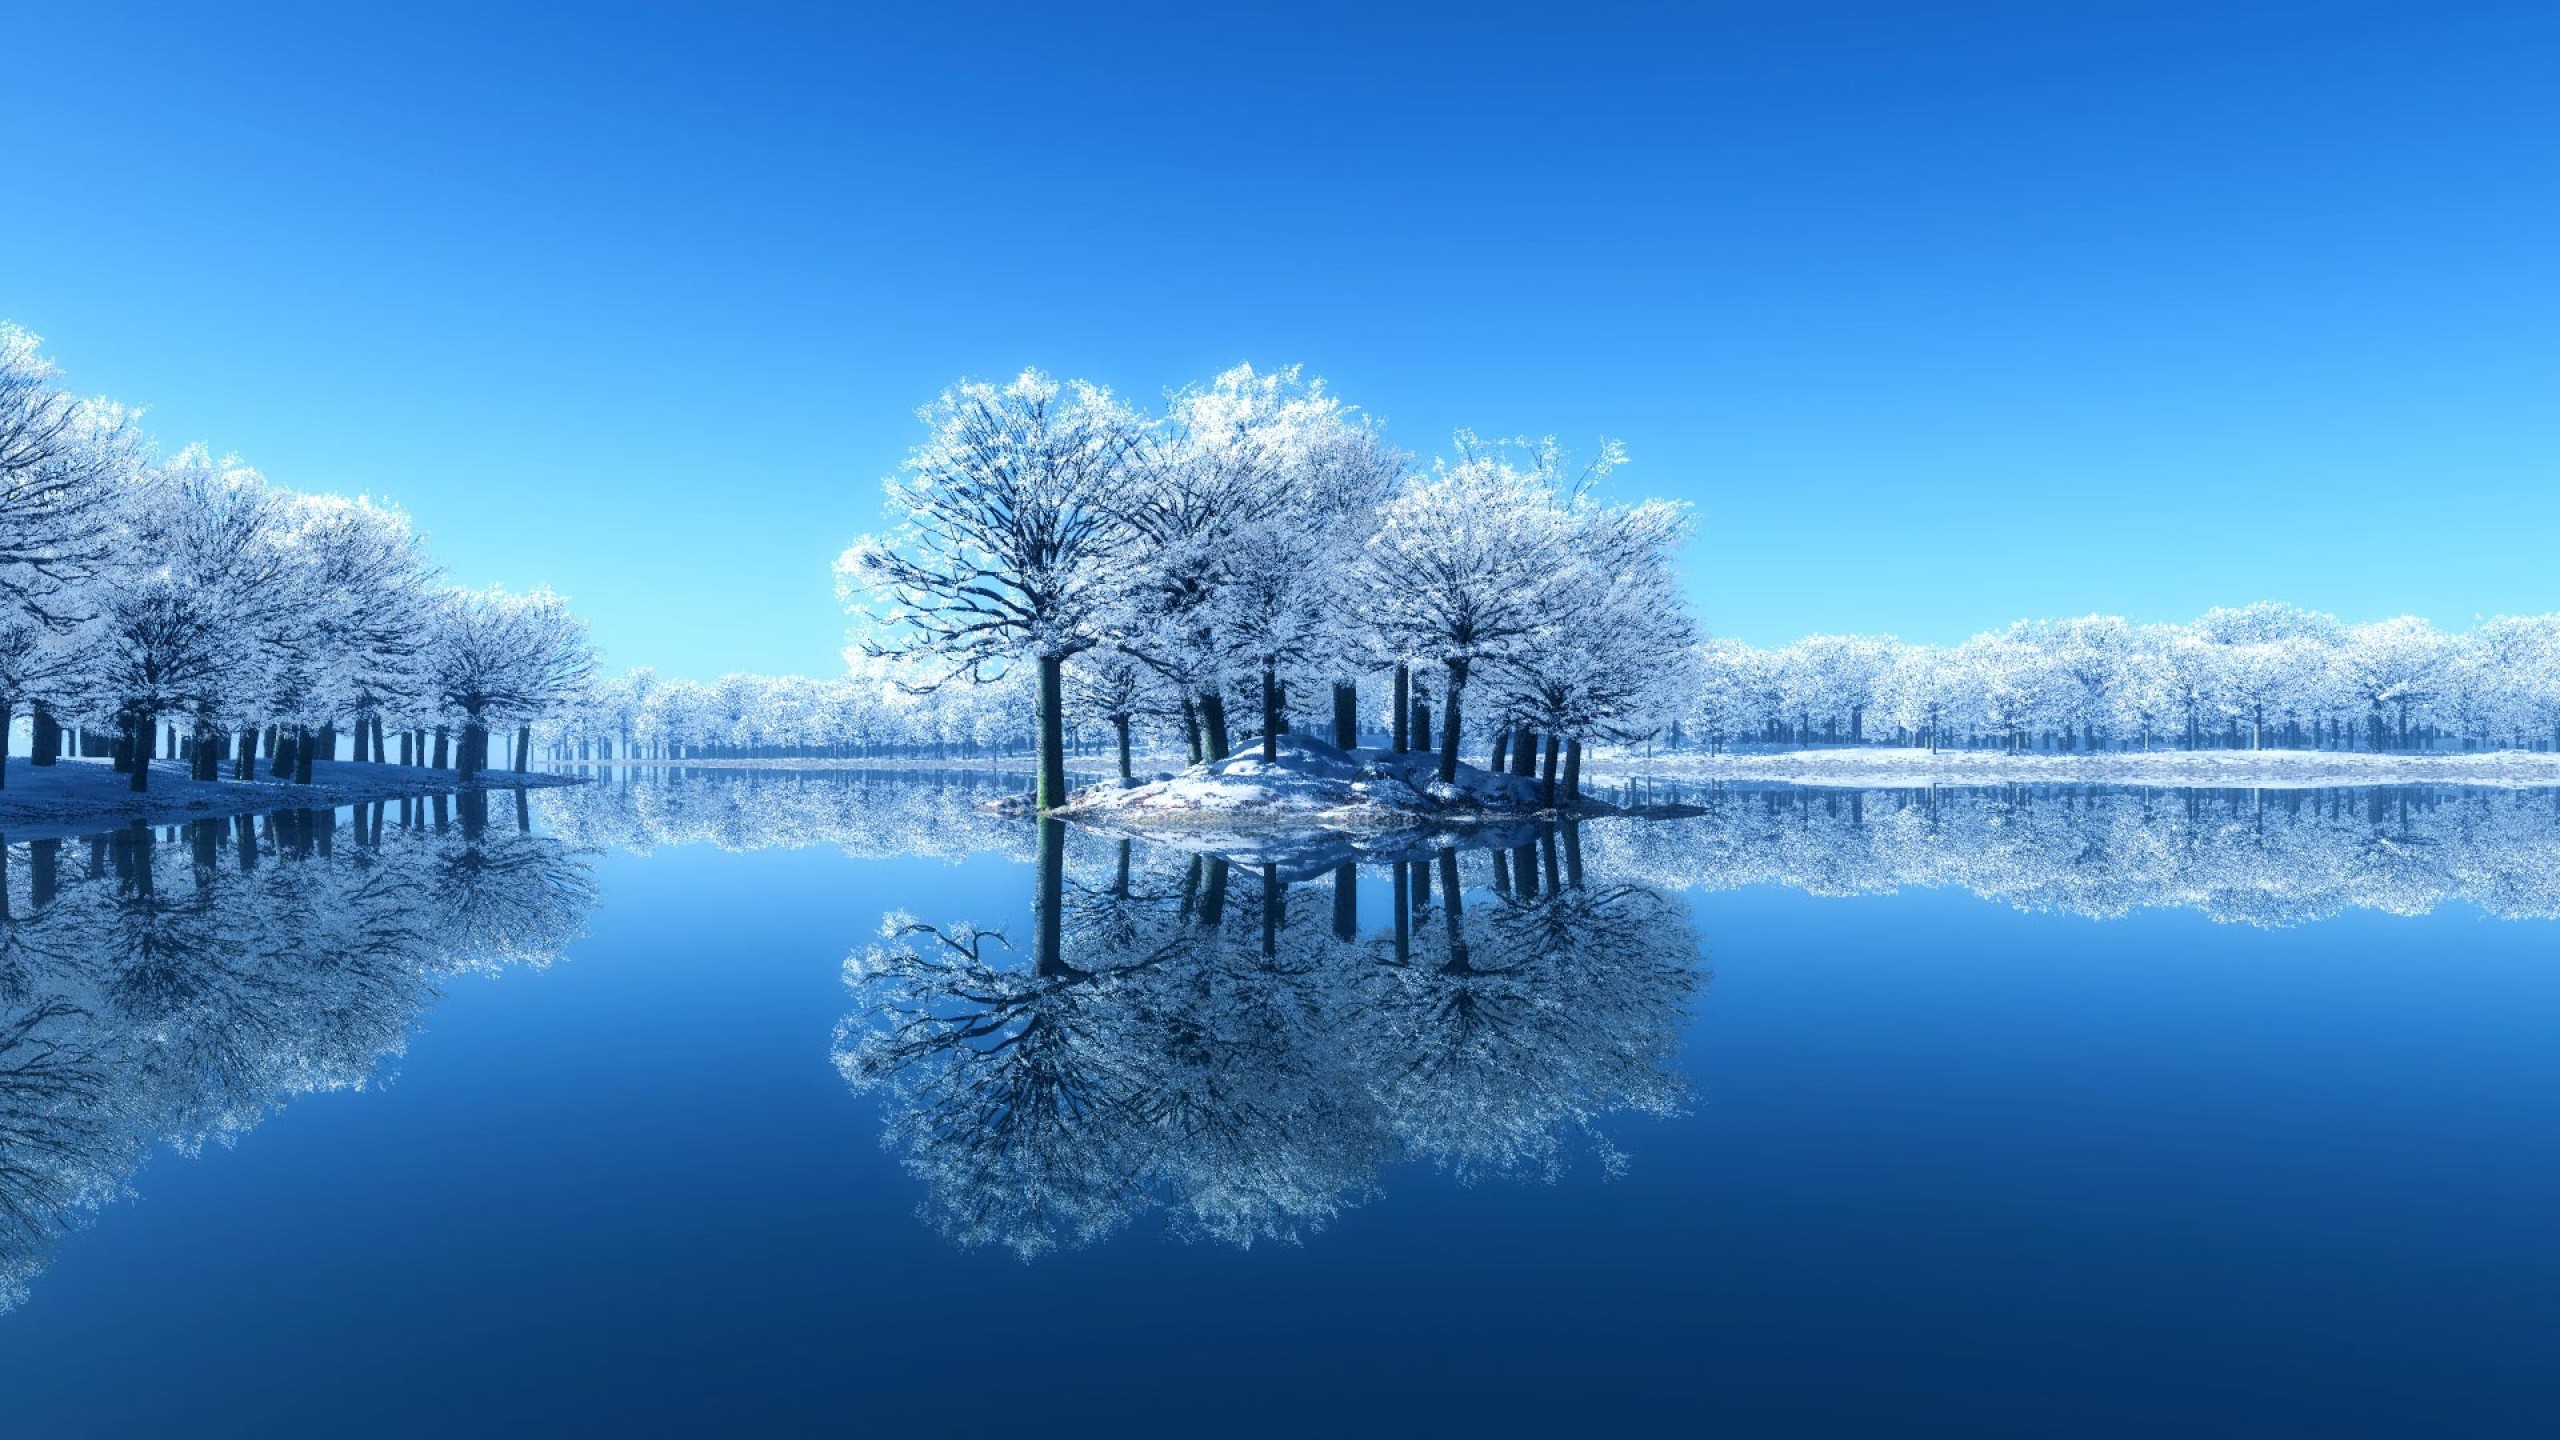 Mobile wallpaper: Winter, Lake, Reflection, Tree, Earth, 619229 download  the picture for free.